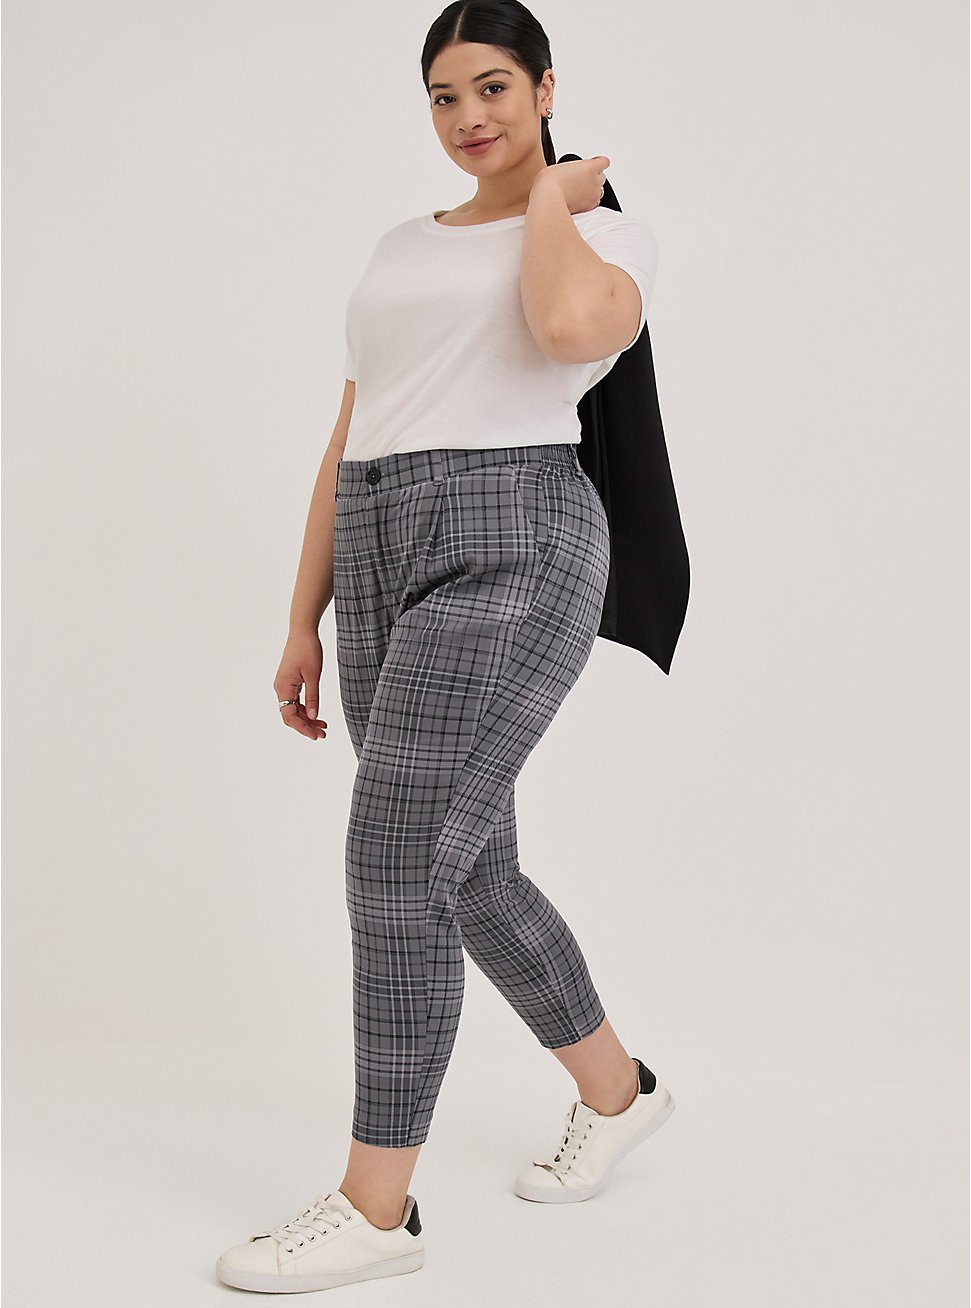 Relaxed Taper Stretch Challis High-Rise Pant, PLAID GREY, hi-res